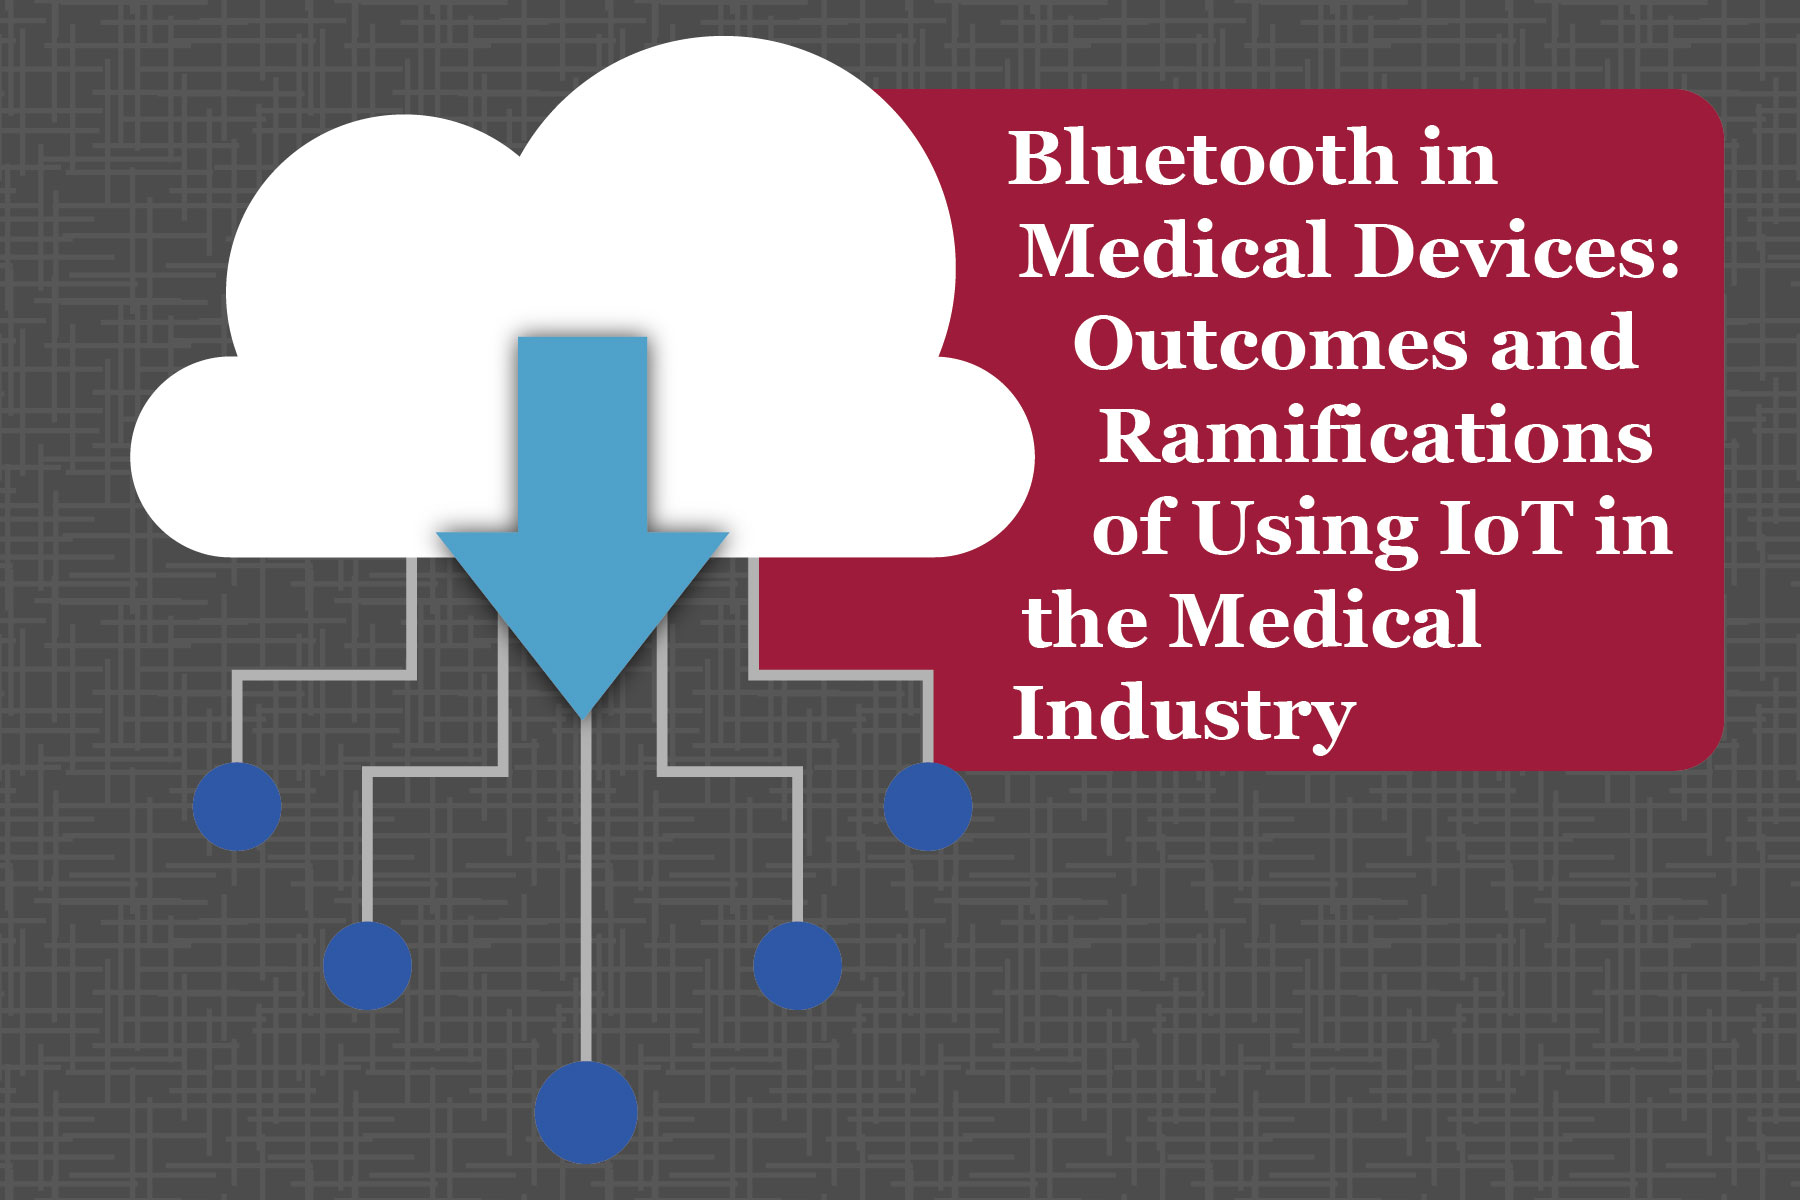 Bluetooth in Medical Devices: Outcomes and Ramifications of Using IoT in the Medical Industry